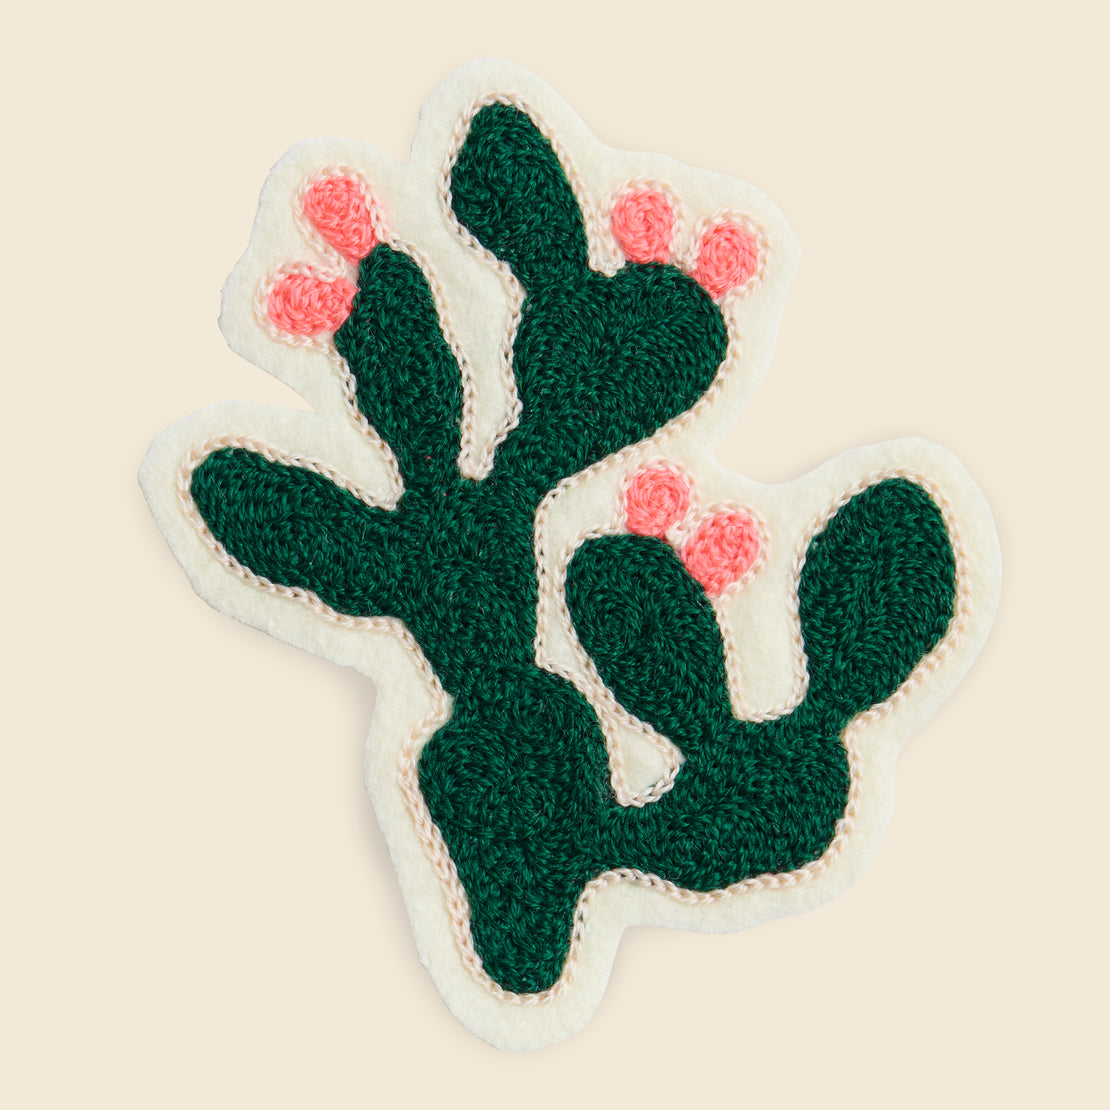 Fort Lonesome Patch - Prickly Pear Cactus